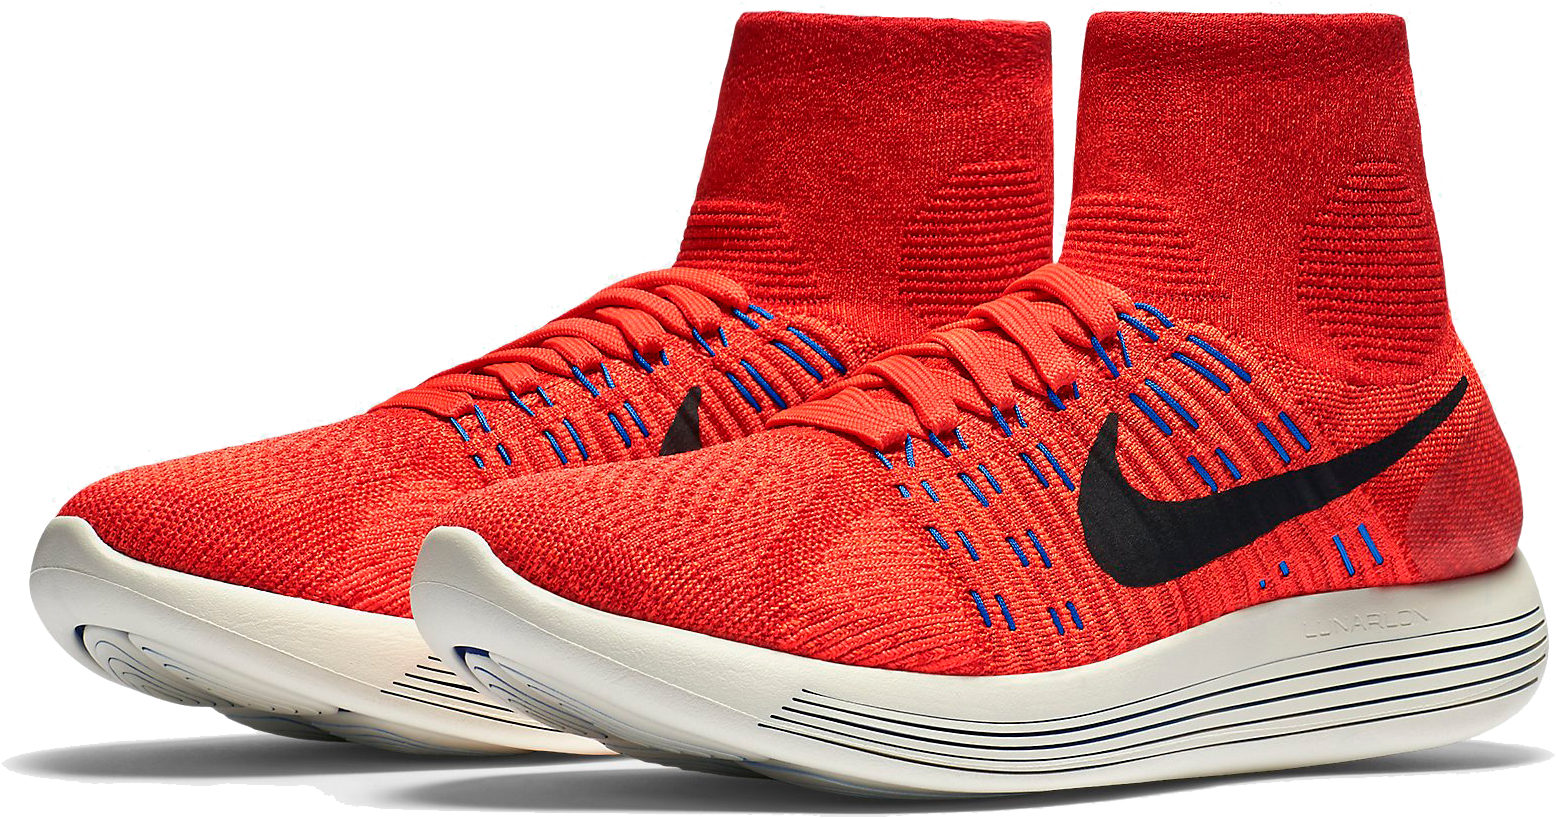 Nike Flyknit Lunarepic Double - Nike Lunarepic Flyknit Red (1860x1312), Png Download